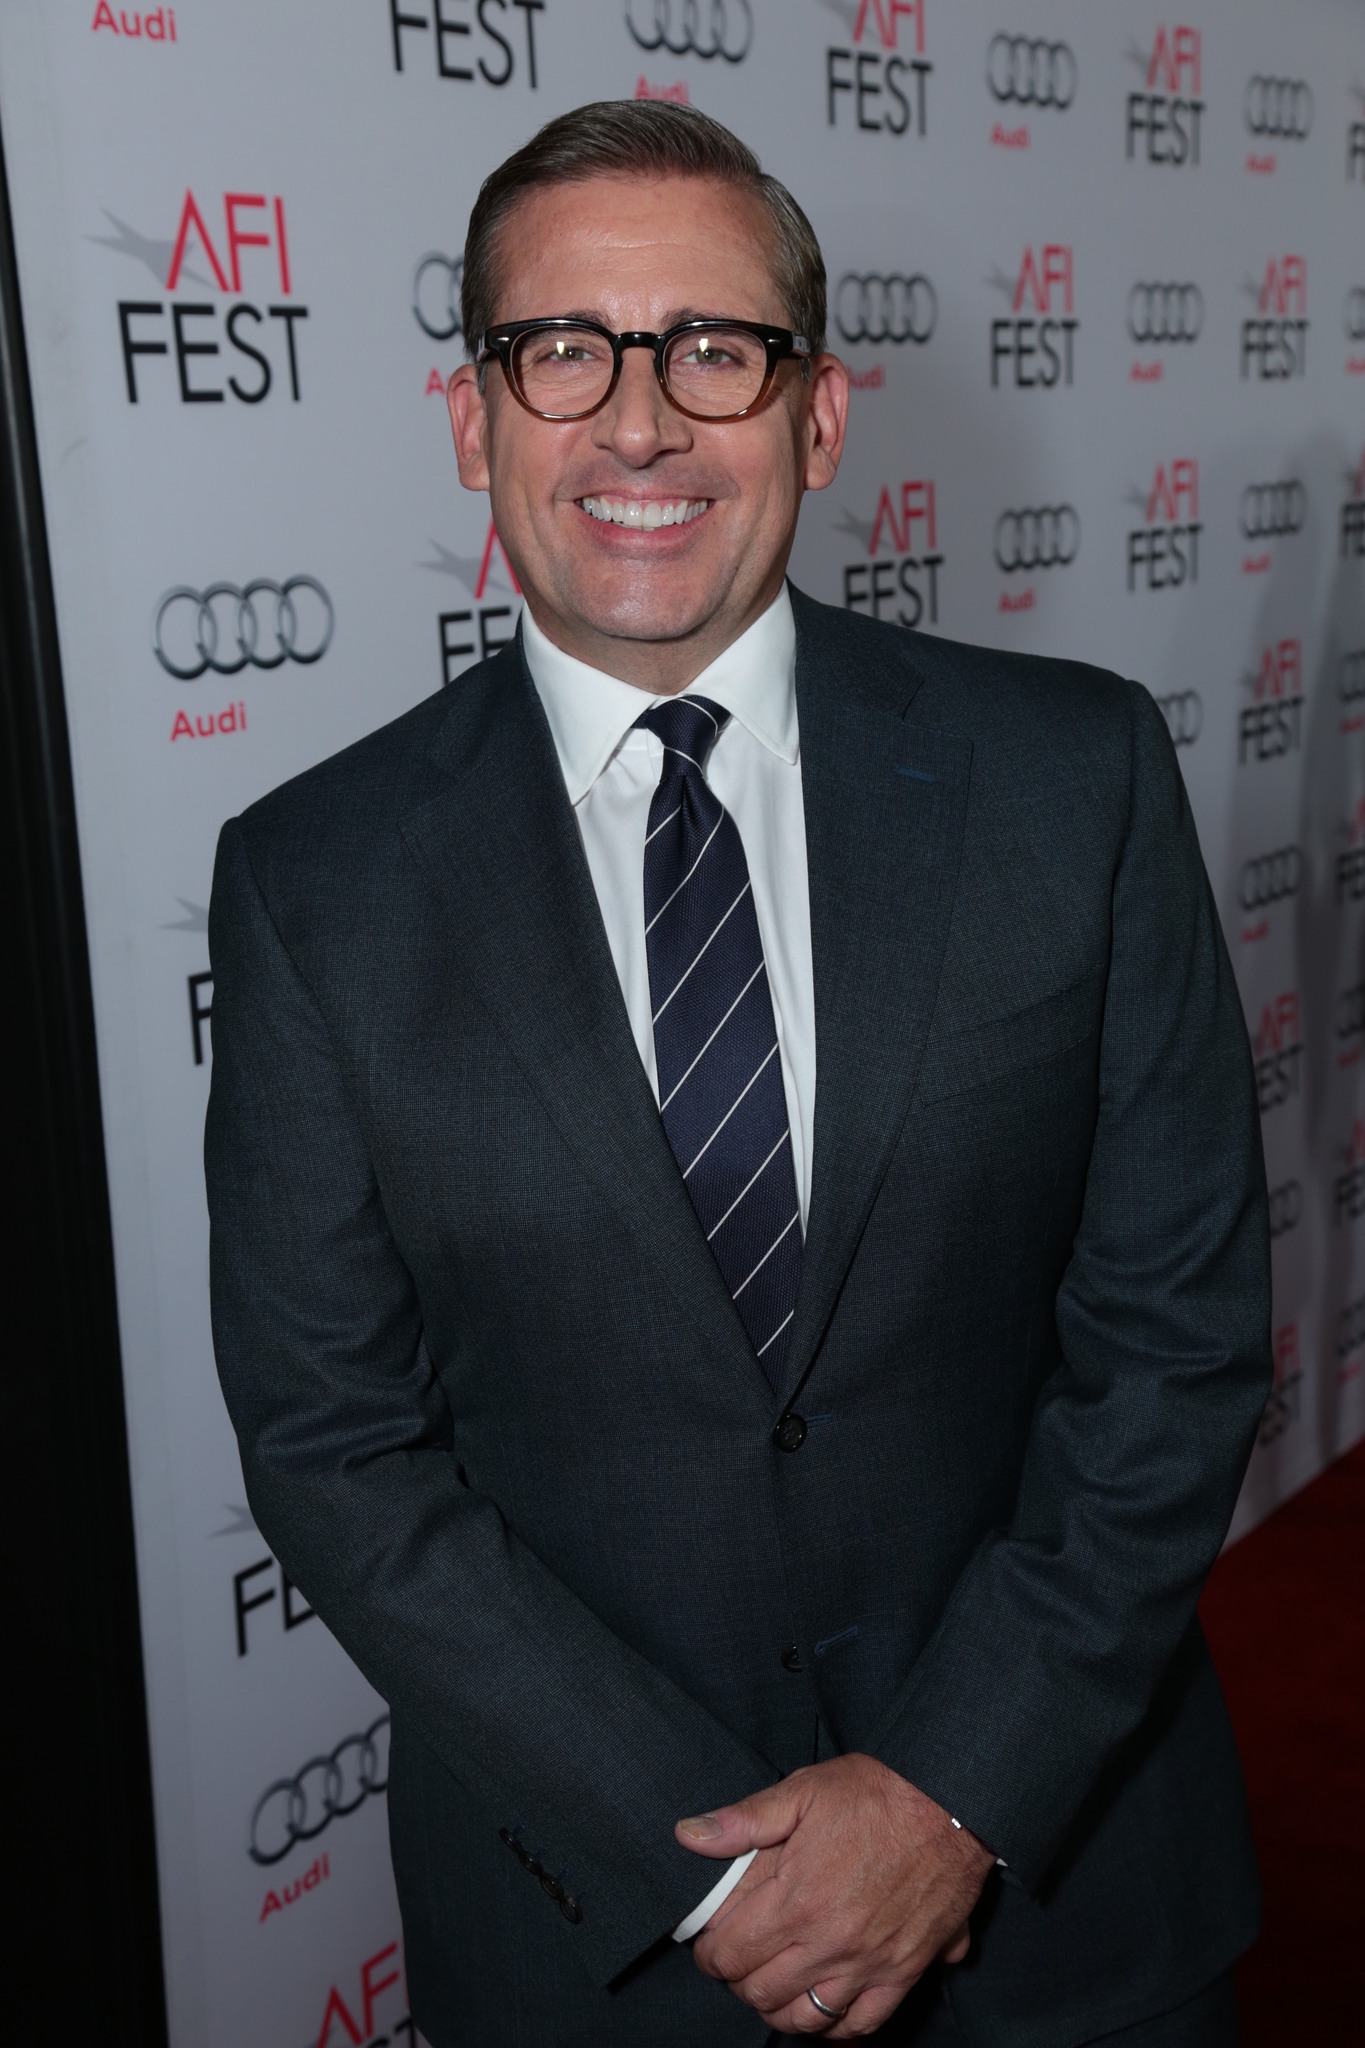 Steve Carell at event of The Big Short (2015)